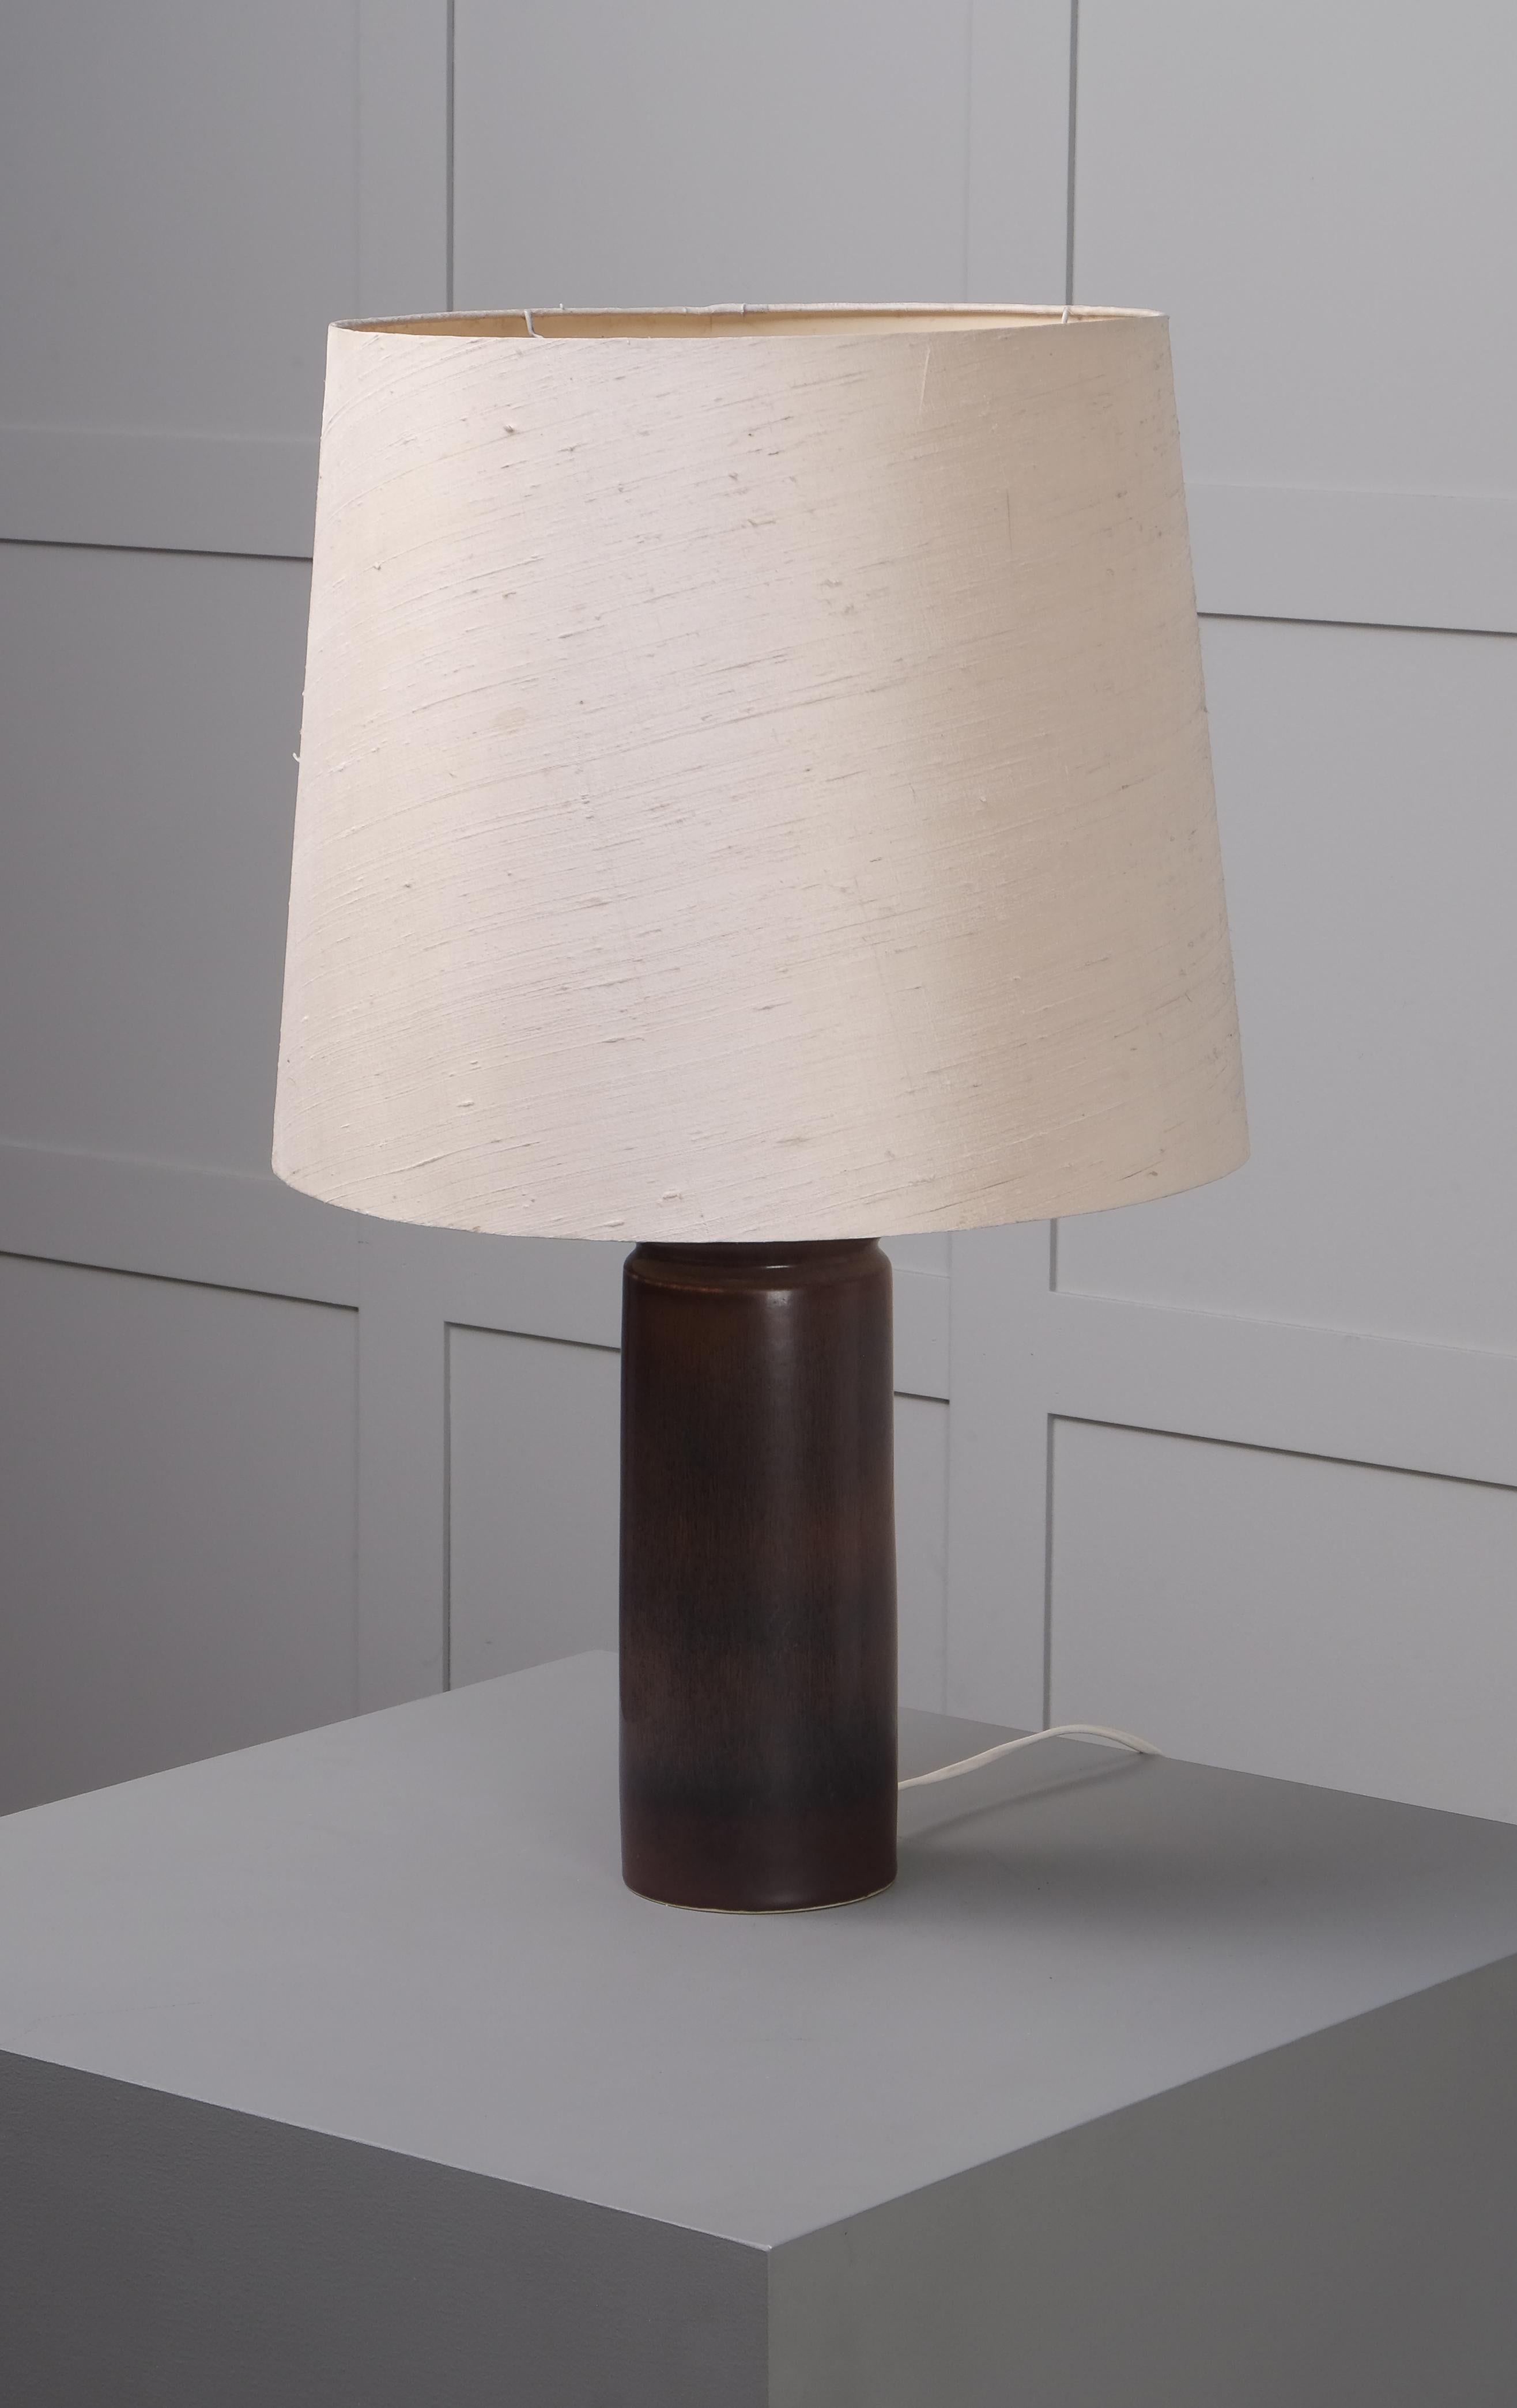 3 lamps available. Listed price is for one lamp.
Brown glazed stoneware, designed by Carl-Harry Stålhane and produced by the Swedish firm Rörstrand, 1950s.
Sold with or without lamp shades.
Measures: Height without shade: 36 cm.